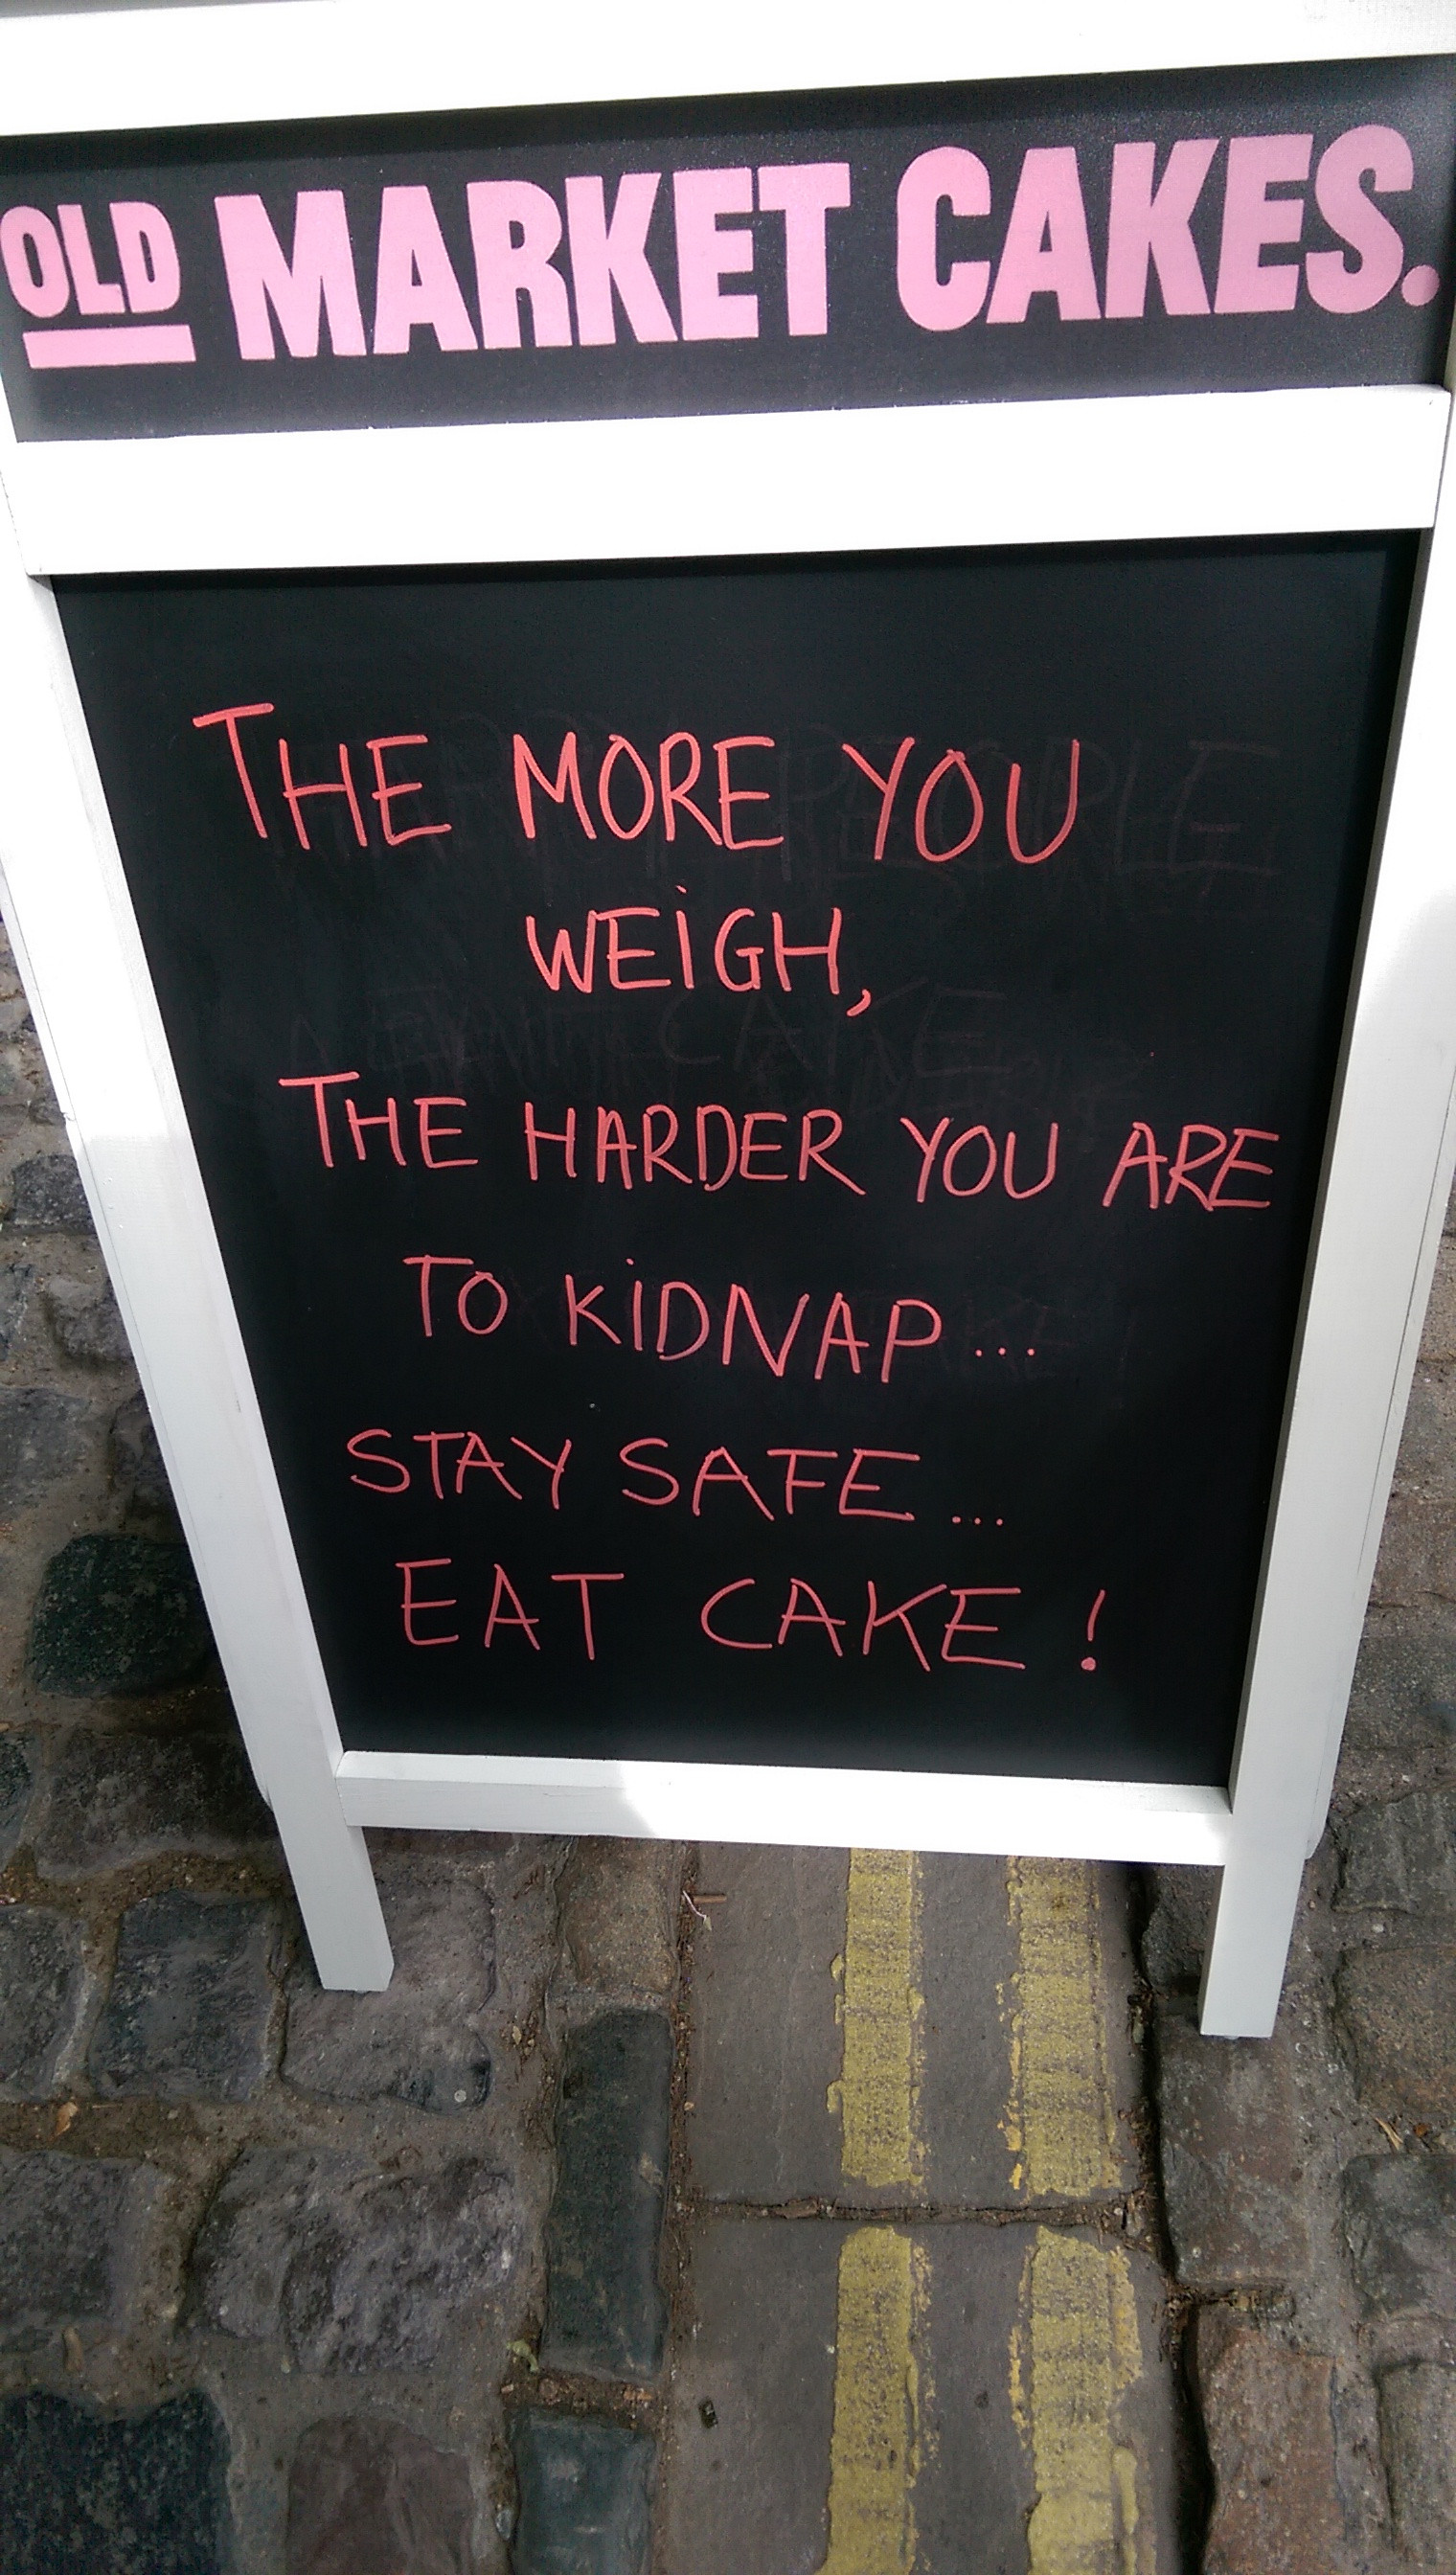 signage - Old Market Cakes The More You Weigh The Harder You Are To Kidnap... Stay Safe... Eat Cake!